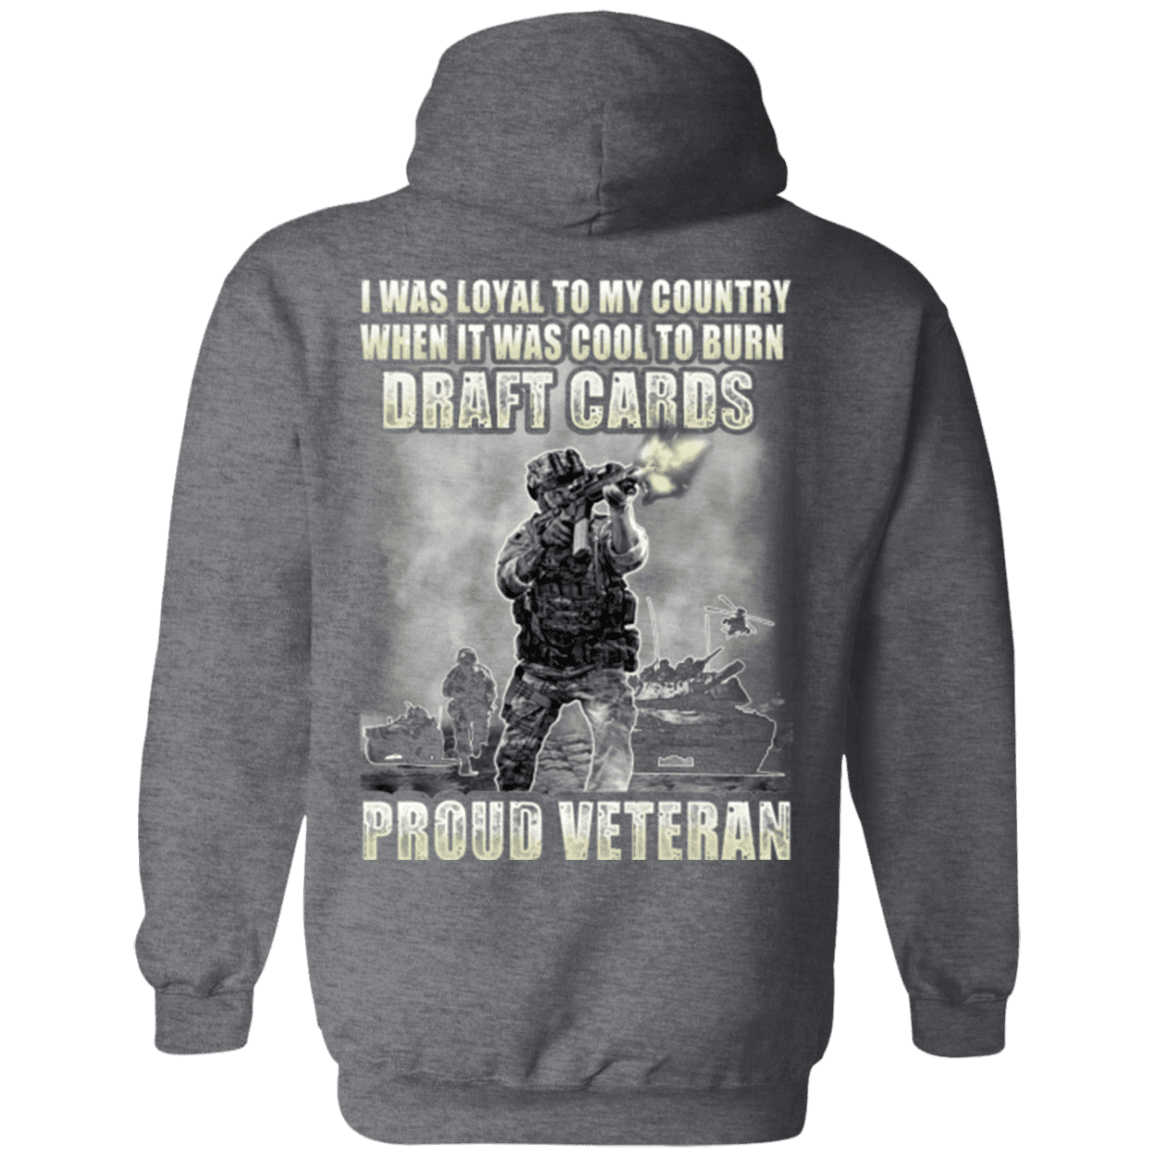 Military T-Shirt "Proud Veteran - I was Loyal To My Country When It Was Cool To Burn Draft Cards"-TShirt-General-Veterans Nation